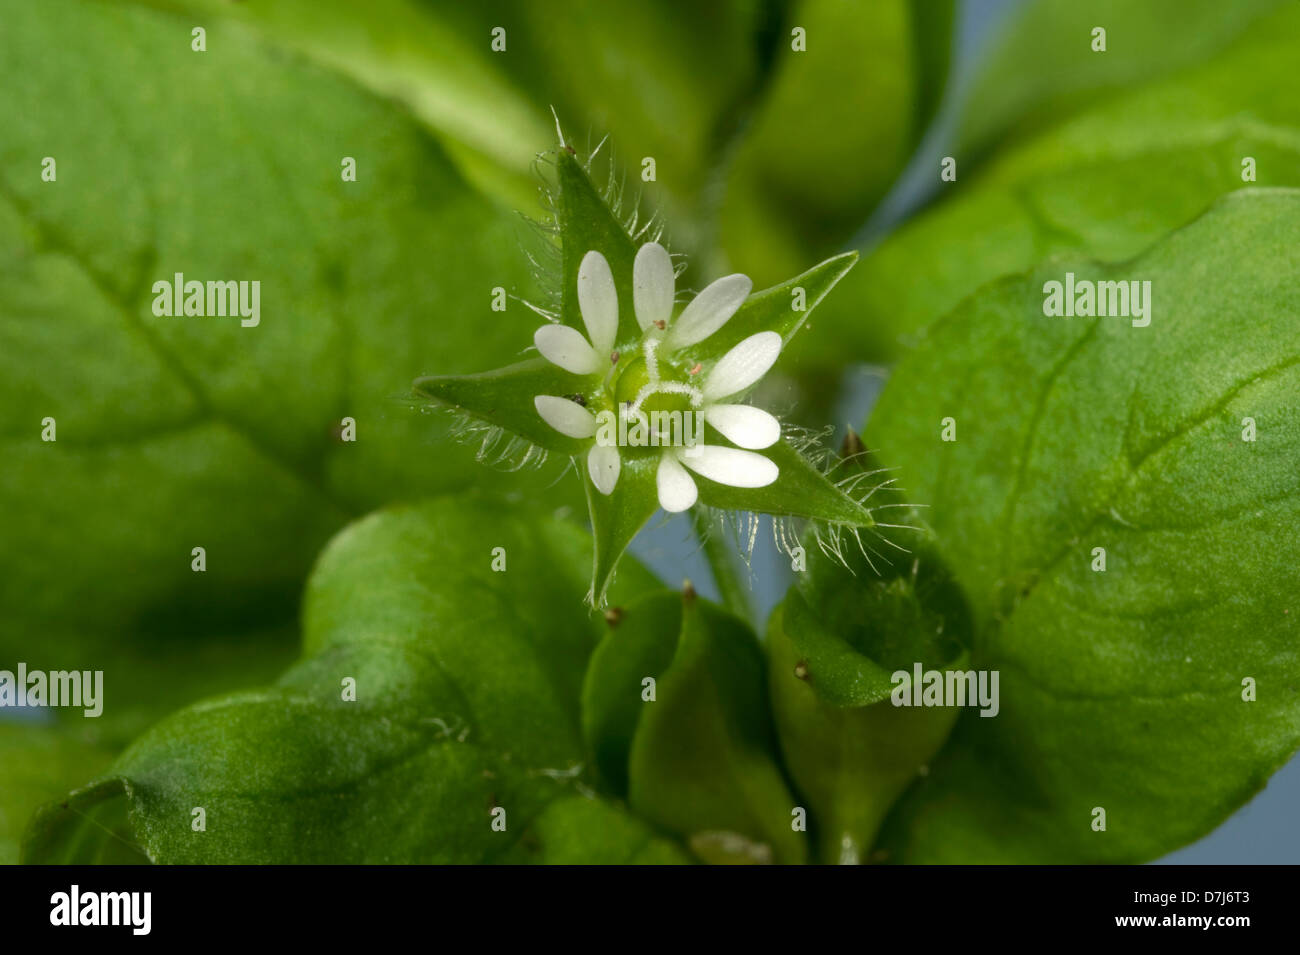 Chickweed, Stellaria media, flowers and leaves of an annual agricultural and garden weed Stock Photo